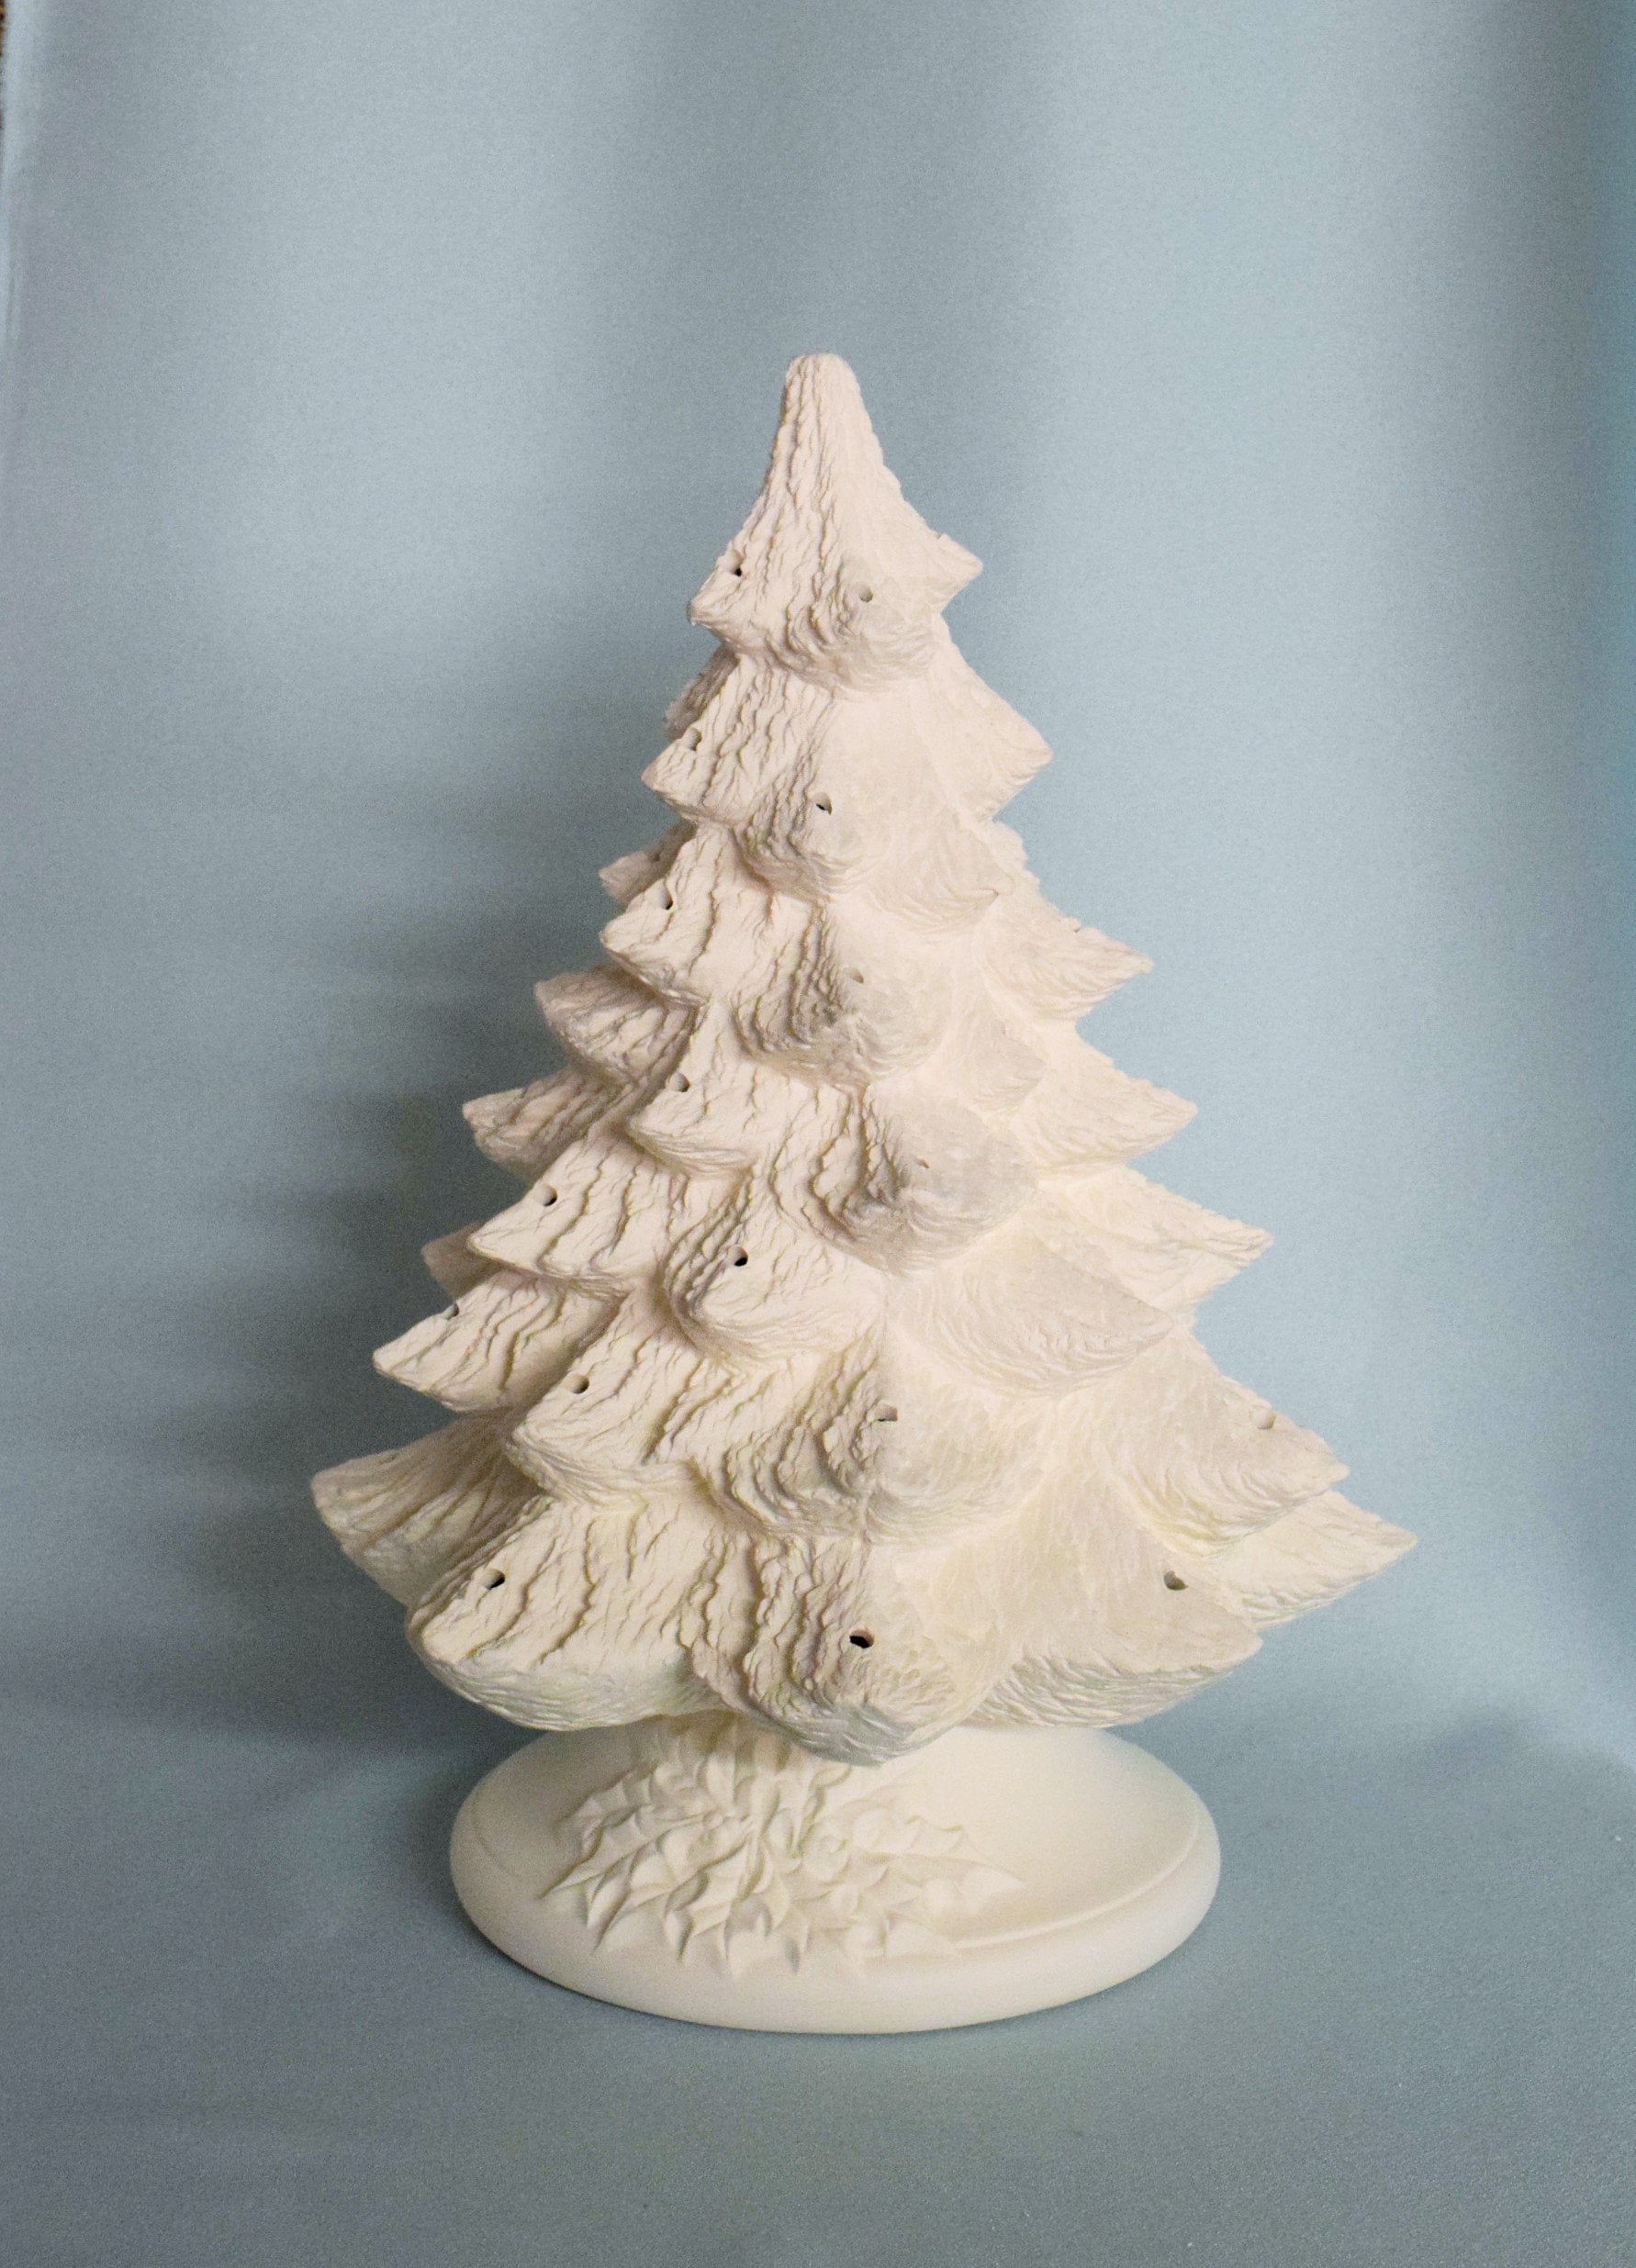 The History of the Vintage Ceramic Christmas Tree – Clark's